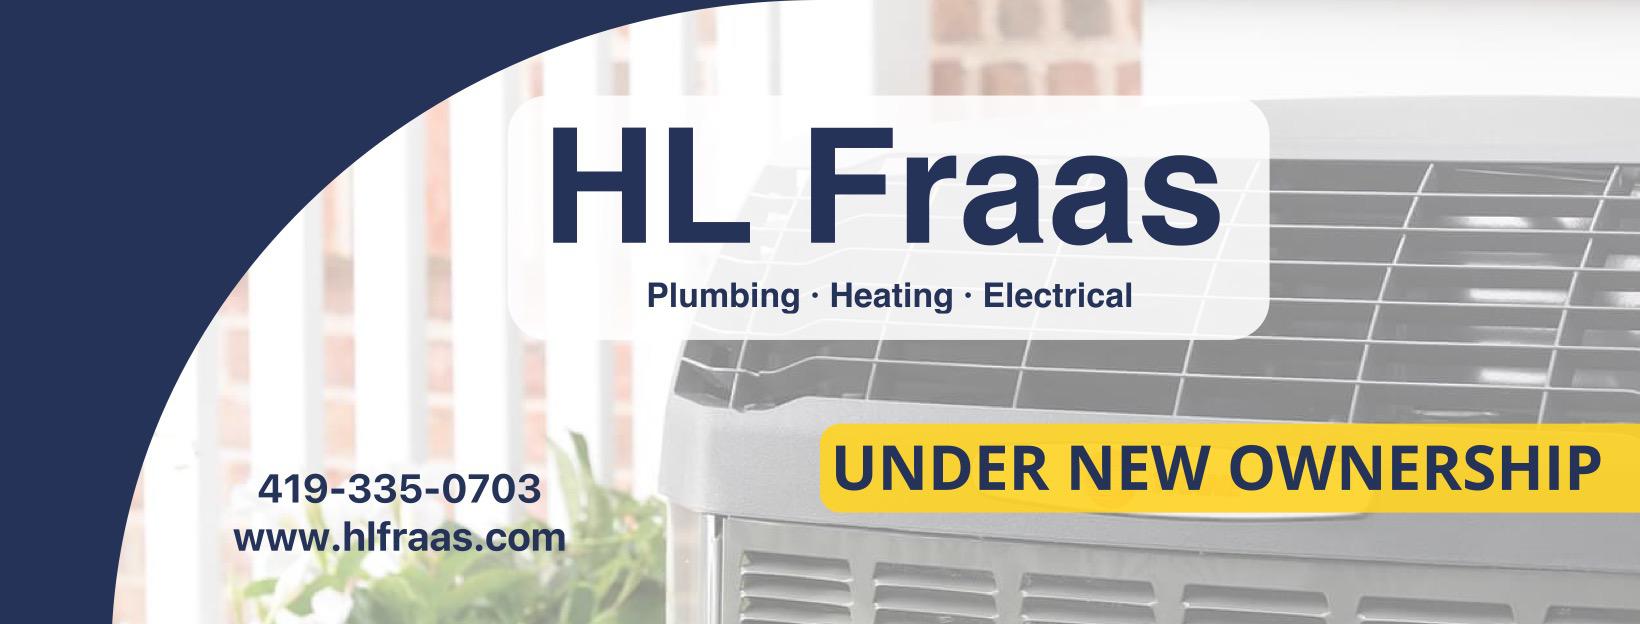 HL Fraas Plumbing, Heating & Electrical 1101 E Lutz Rd, Archbold Ohio 43502